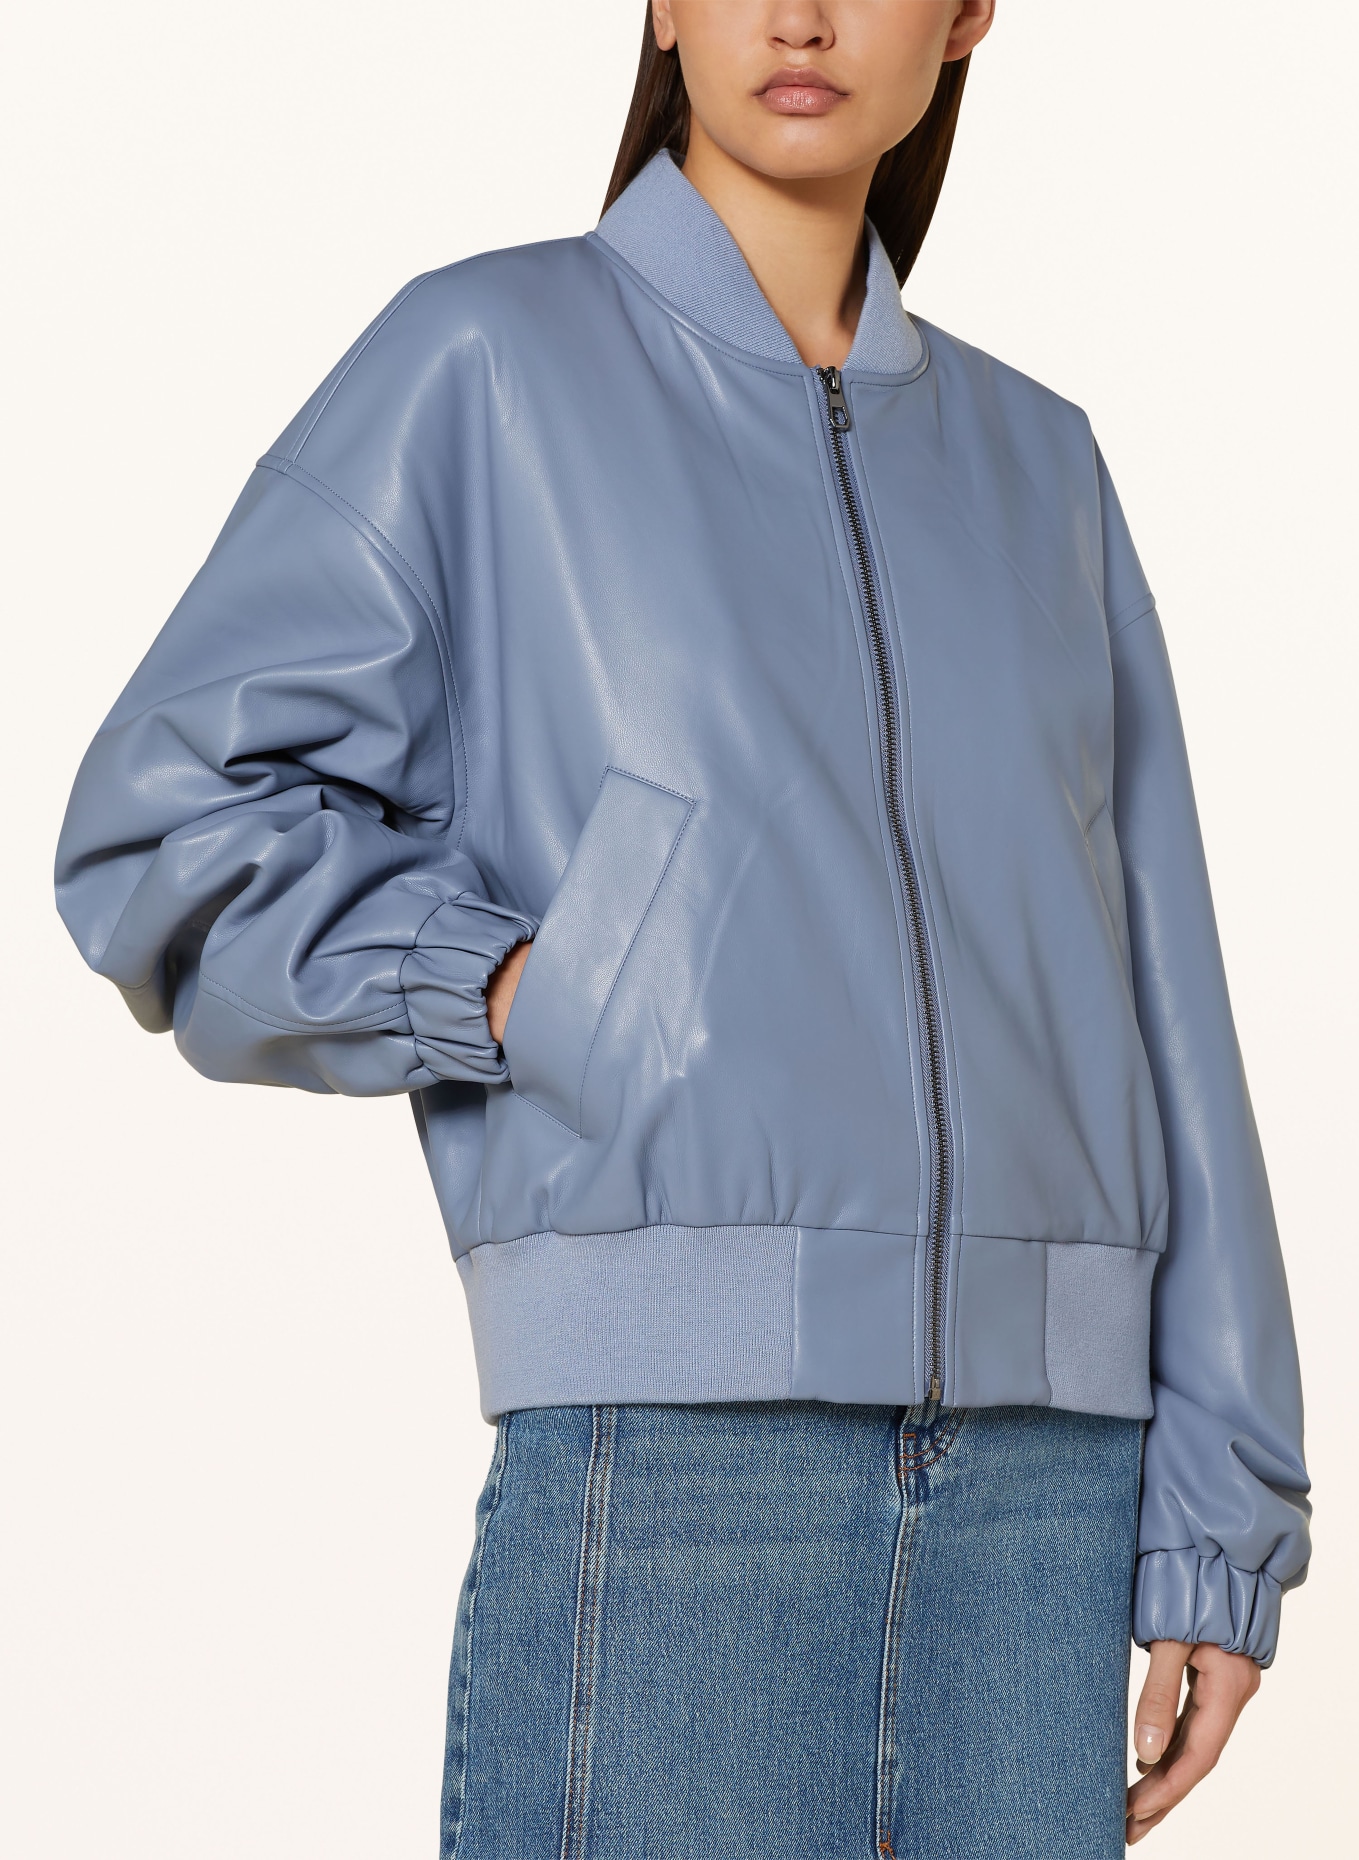 ESSENTIEL ANTWERP Bomber jacket FACES in leather look, Color: LIGHT BLUE (Image 4)